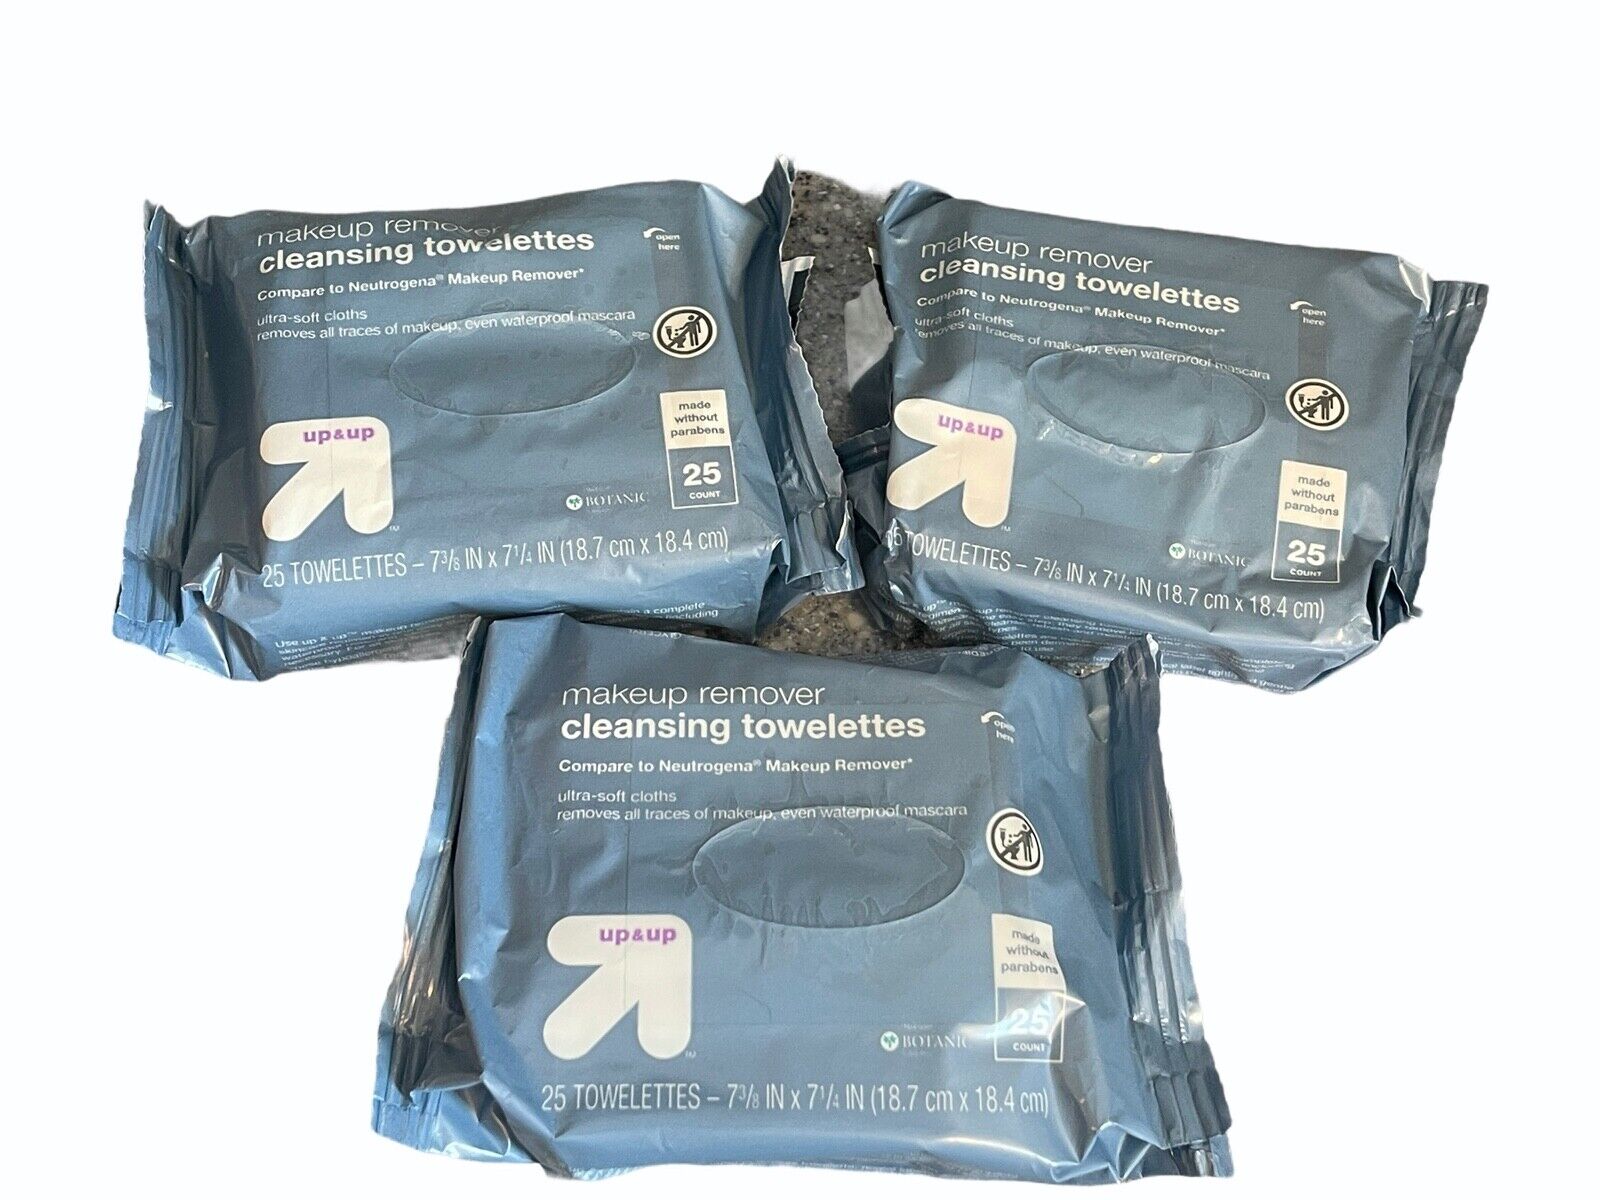 3 Up & Up Makeup Remover Cleansing Towelettes Wipes 25 Ct Each...